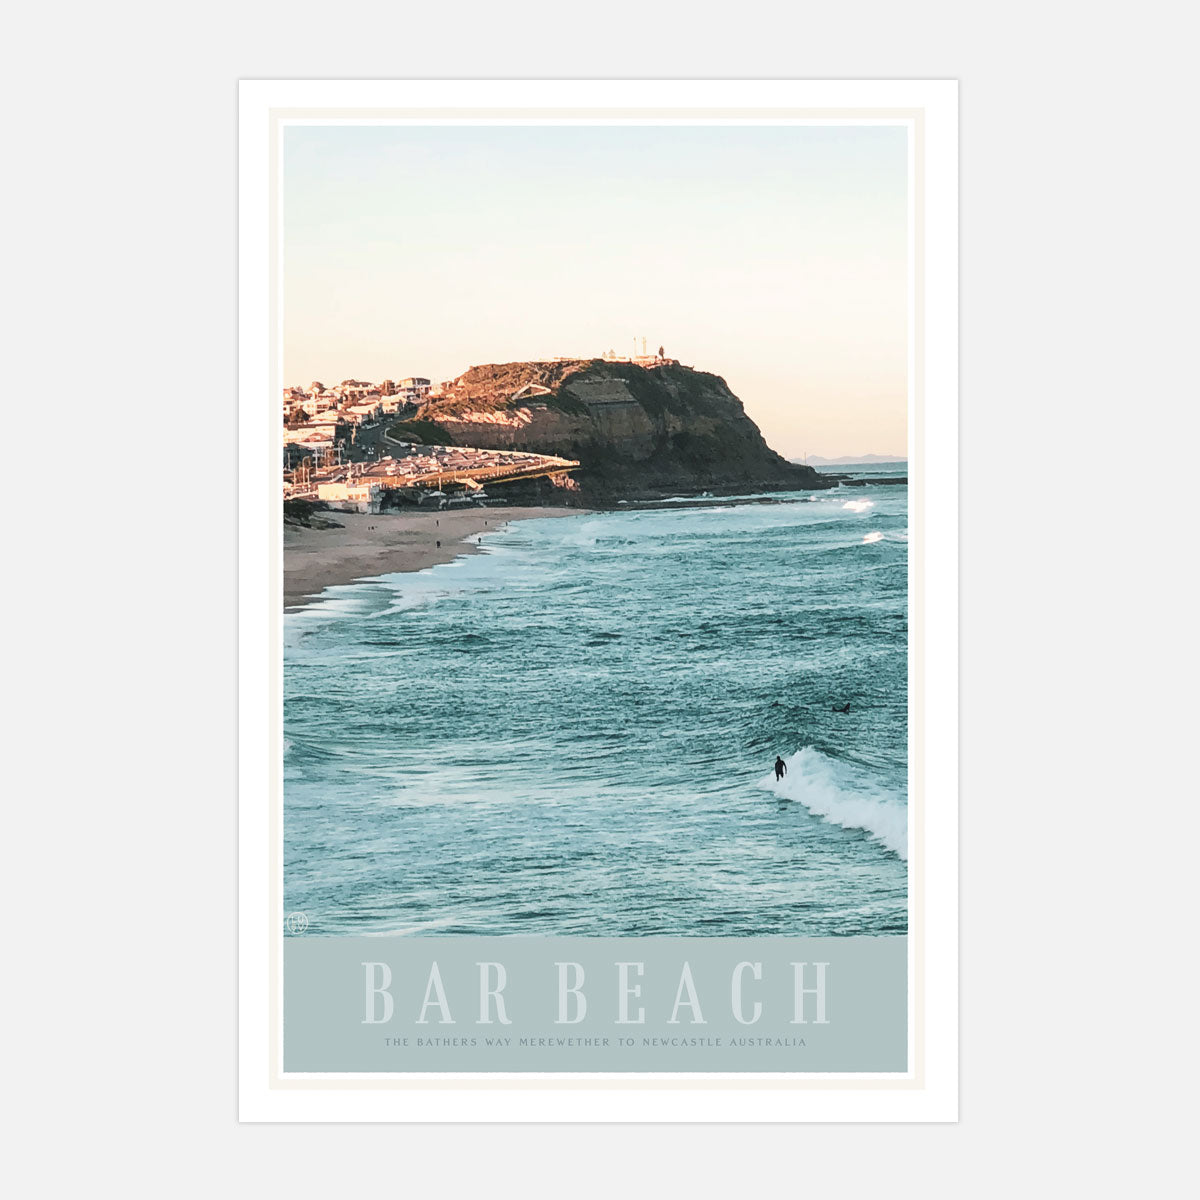 Bar Beach Newcastle vintage retro poster from Places We Luv